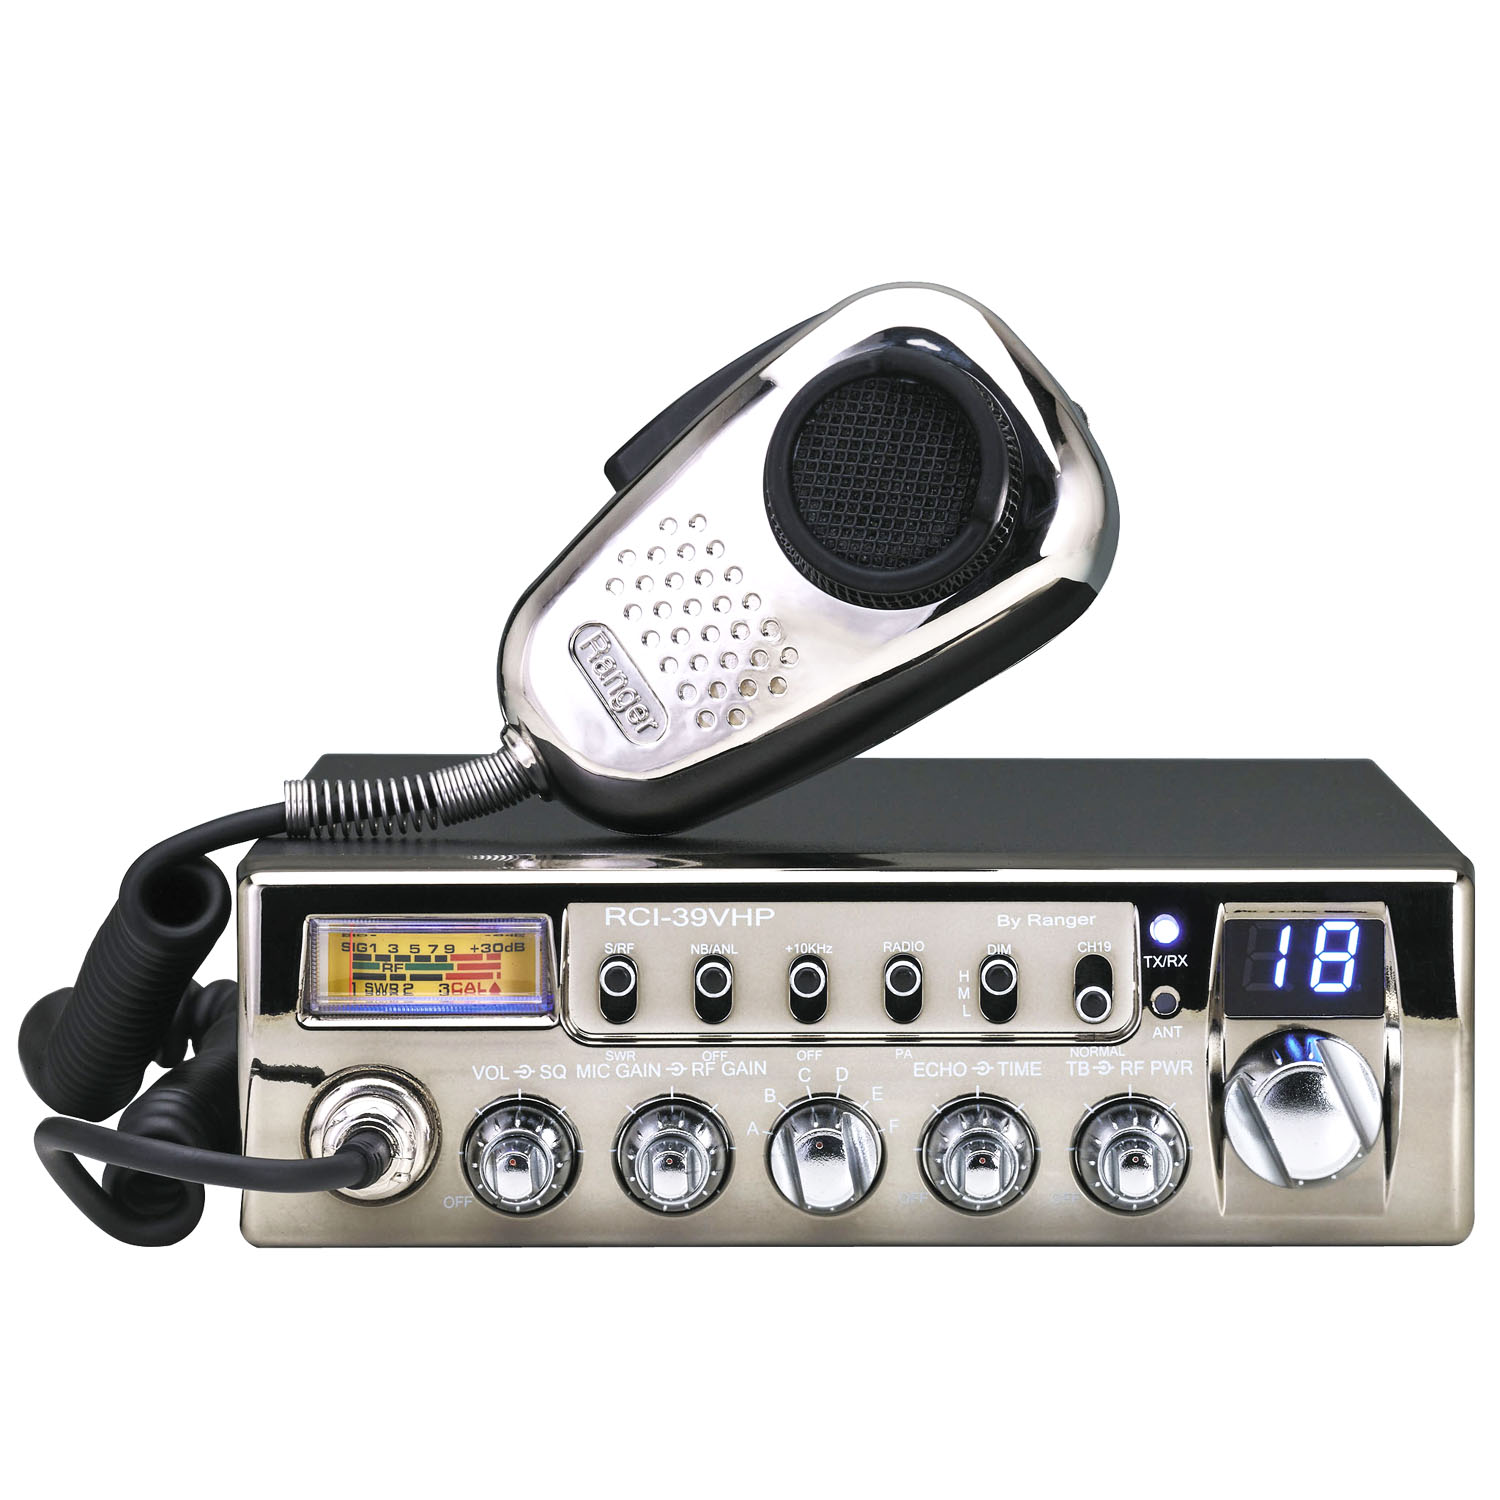 RCI- 60 WATT+ COMPACT 10 METER AM MOBILE TRANSCEIVER WITH DARK CHROME PANEL, CHROME NOISE CANCELLING MICROPHONE, ECHO & TALK BA